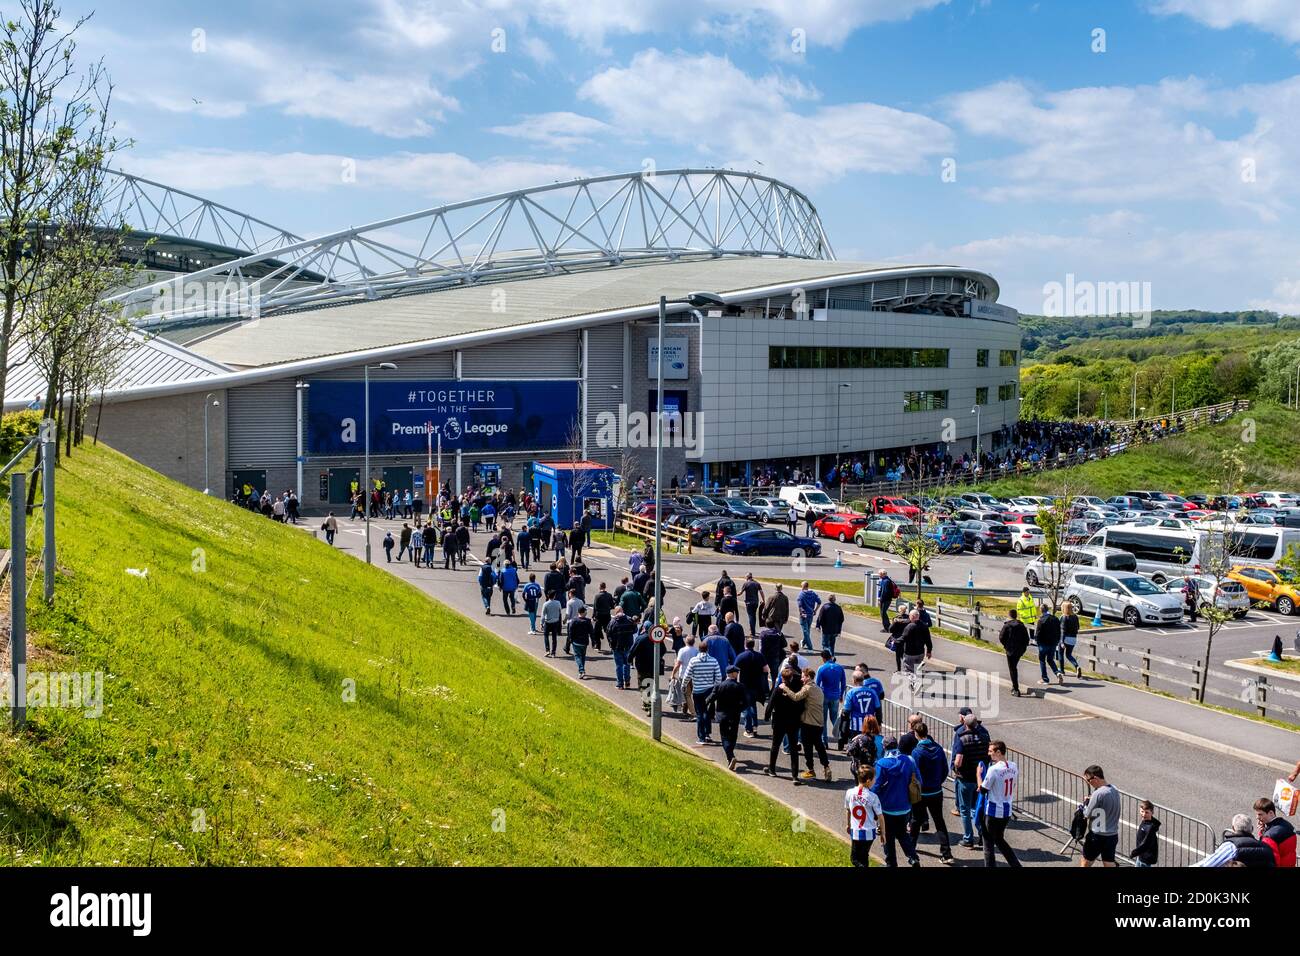 British Football Fans On Their Way To Watch Brighton and Hove Albion Play At The Amex Stadium, Brighton, Sussex, UK. Stock Photo